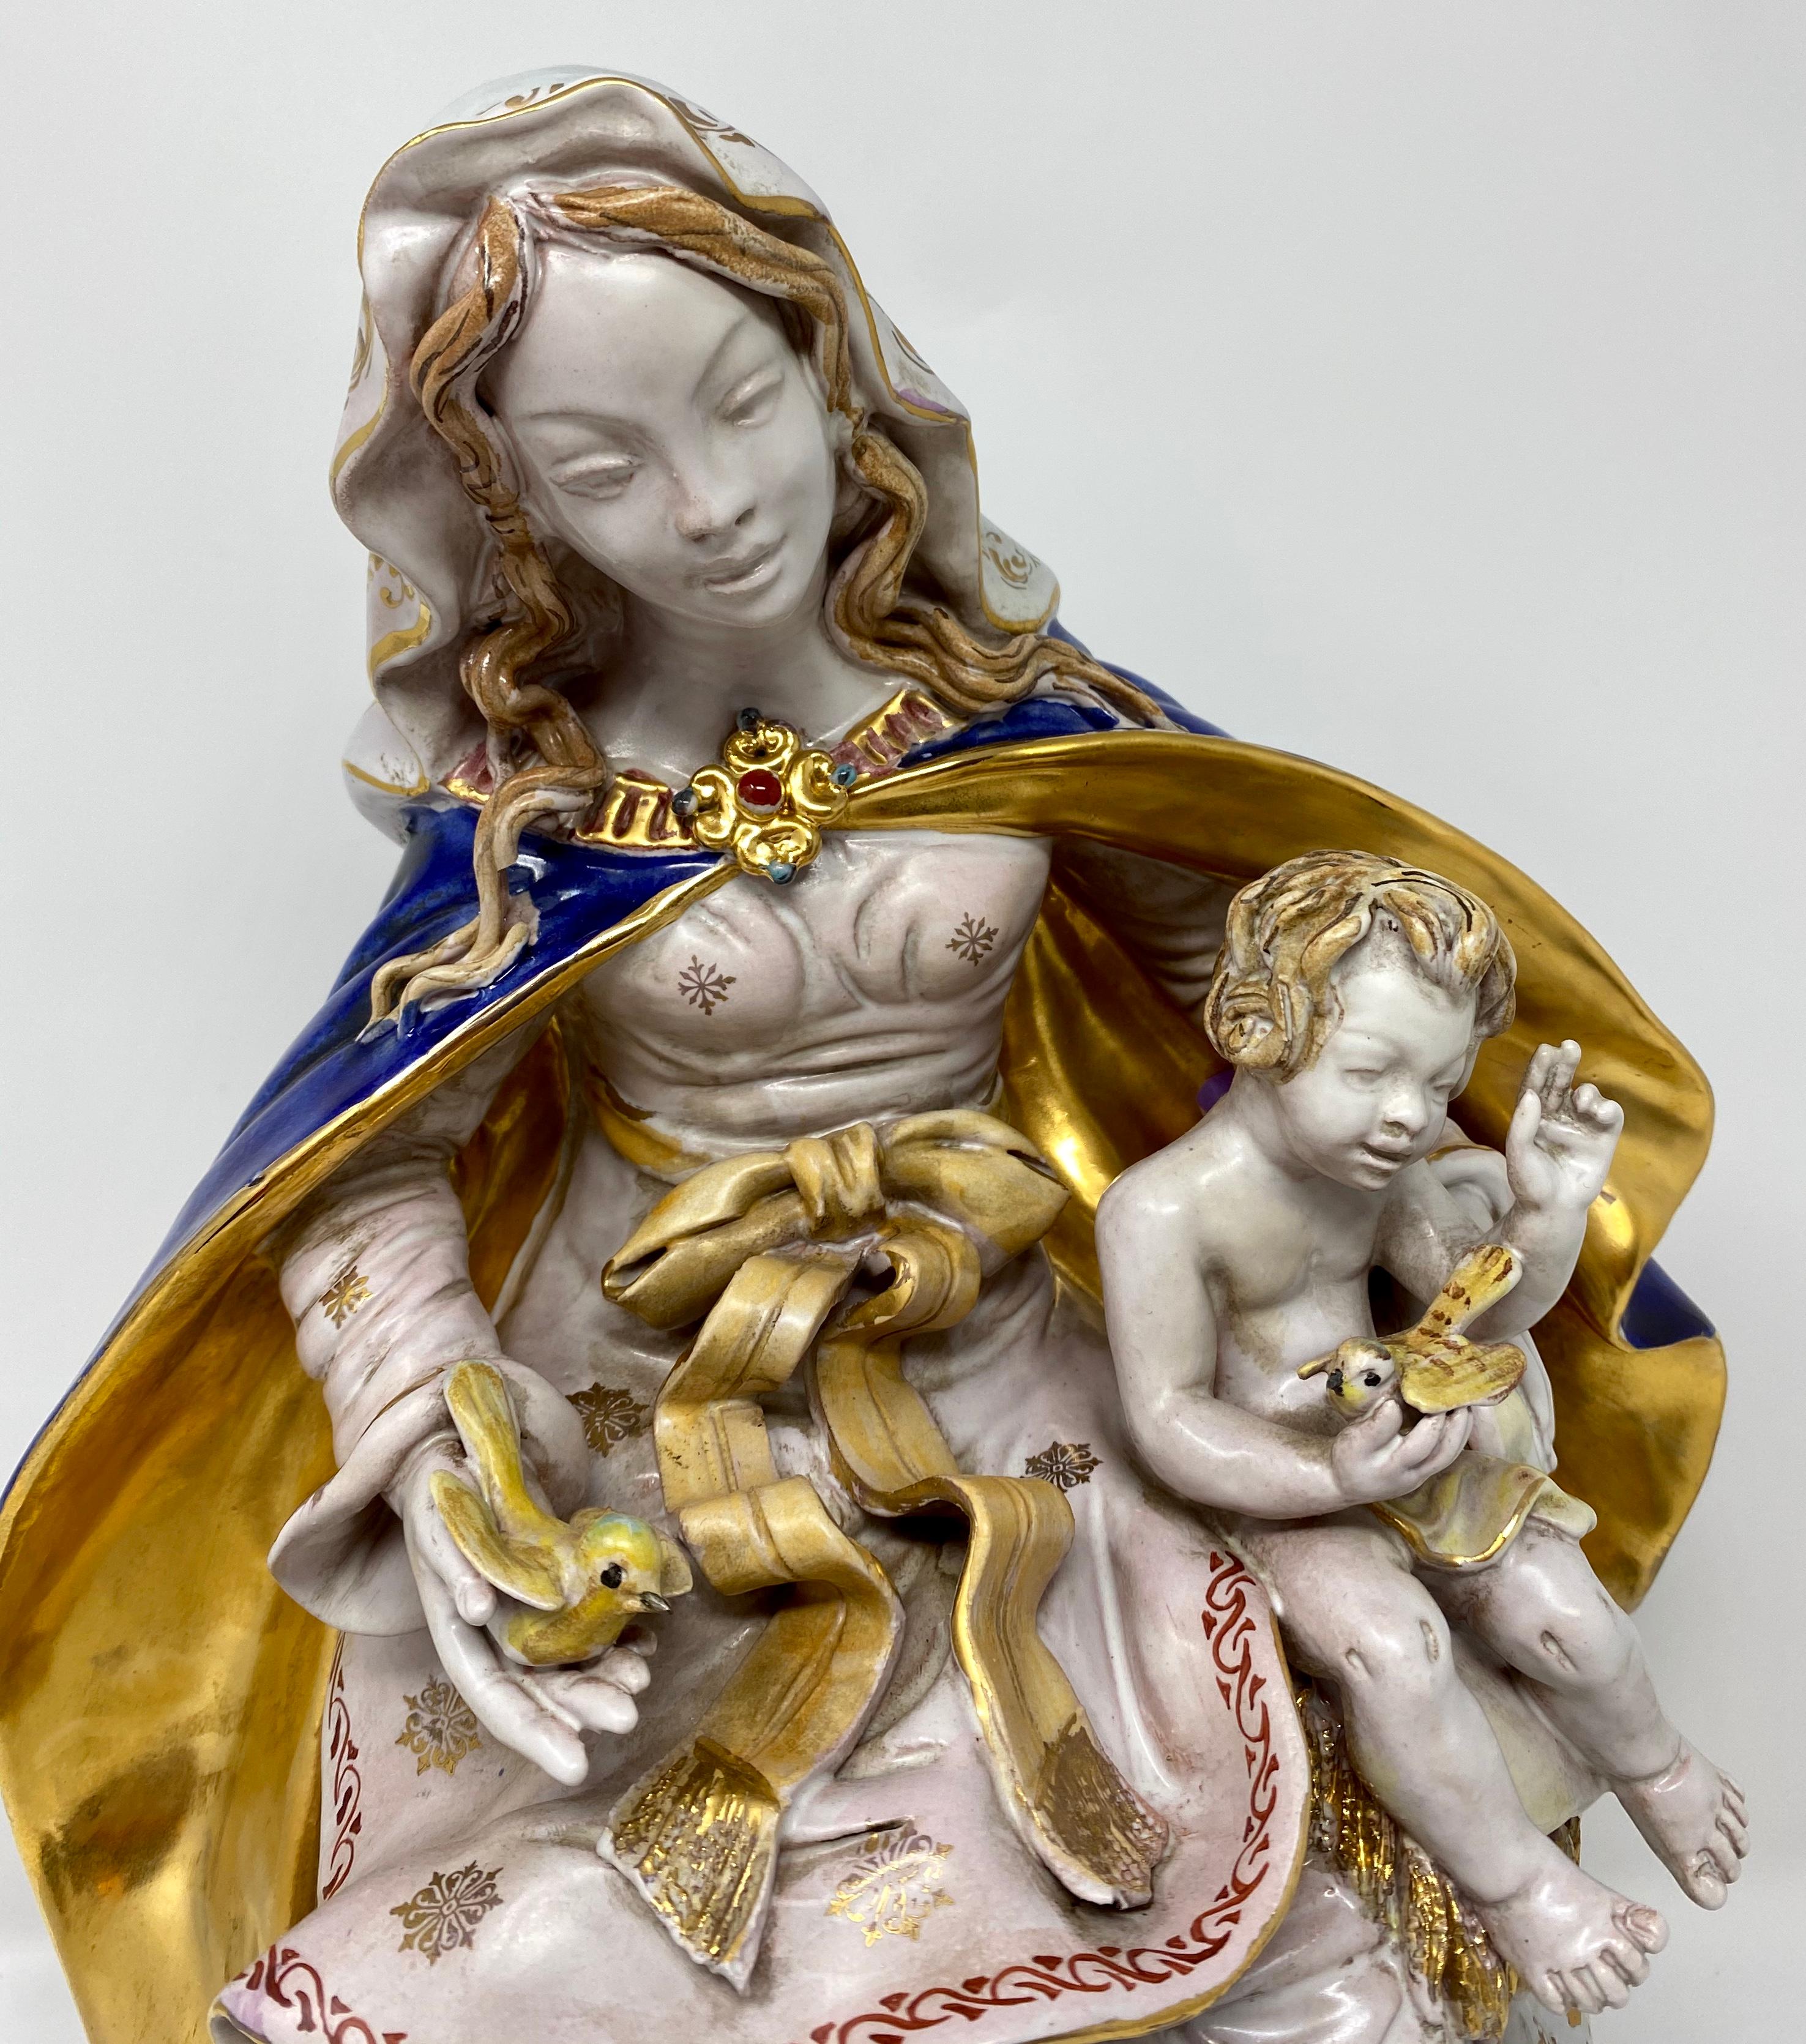 20th Century Original Porcelain Figure of Mother and Child Signed by S. Marchi, Maker For Sale